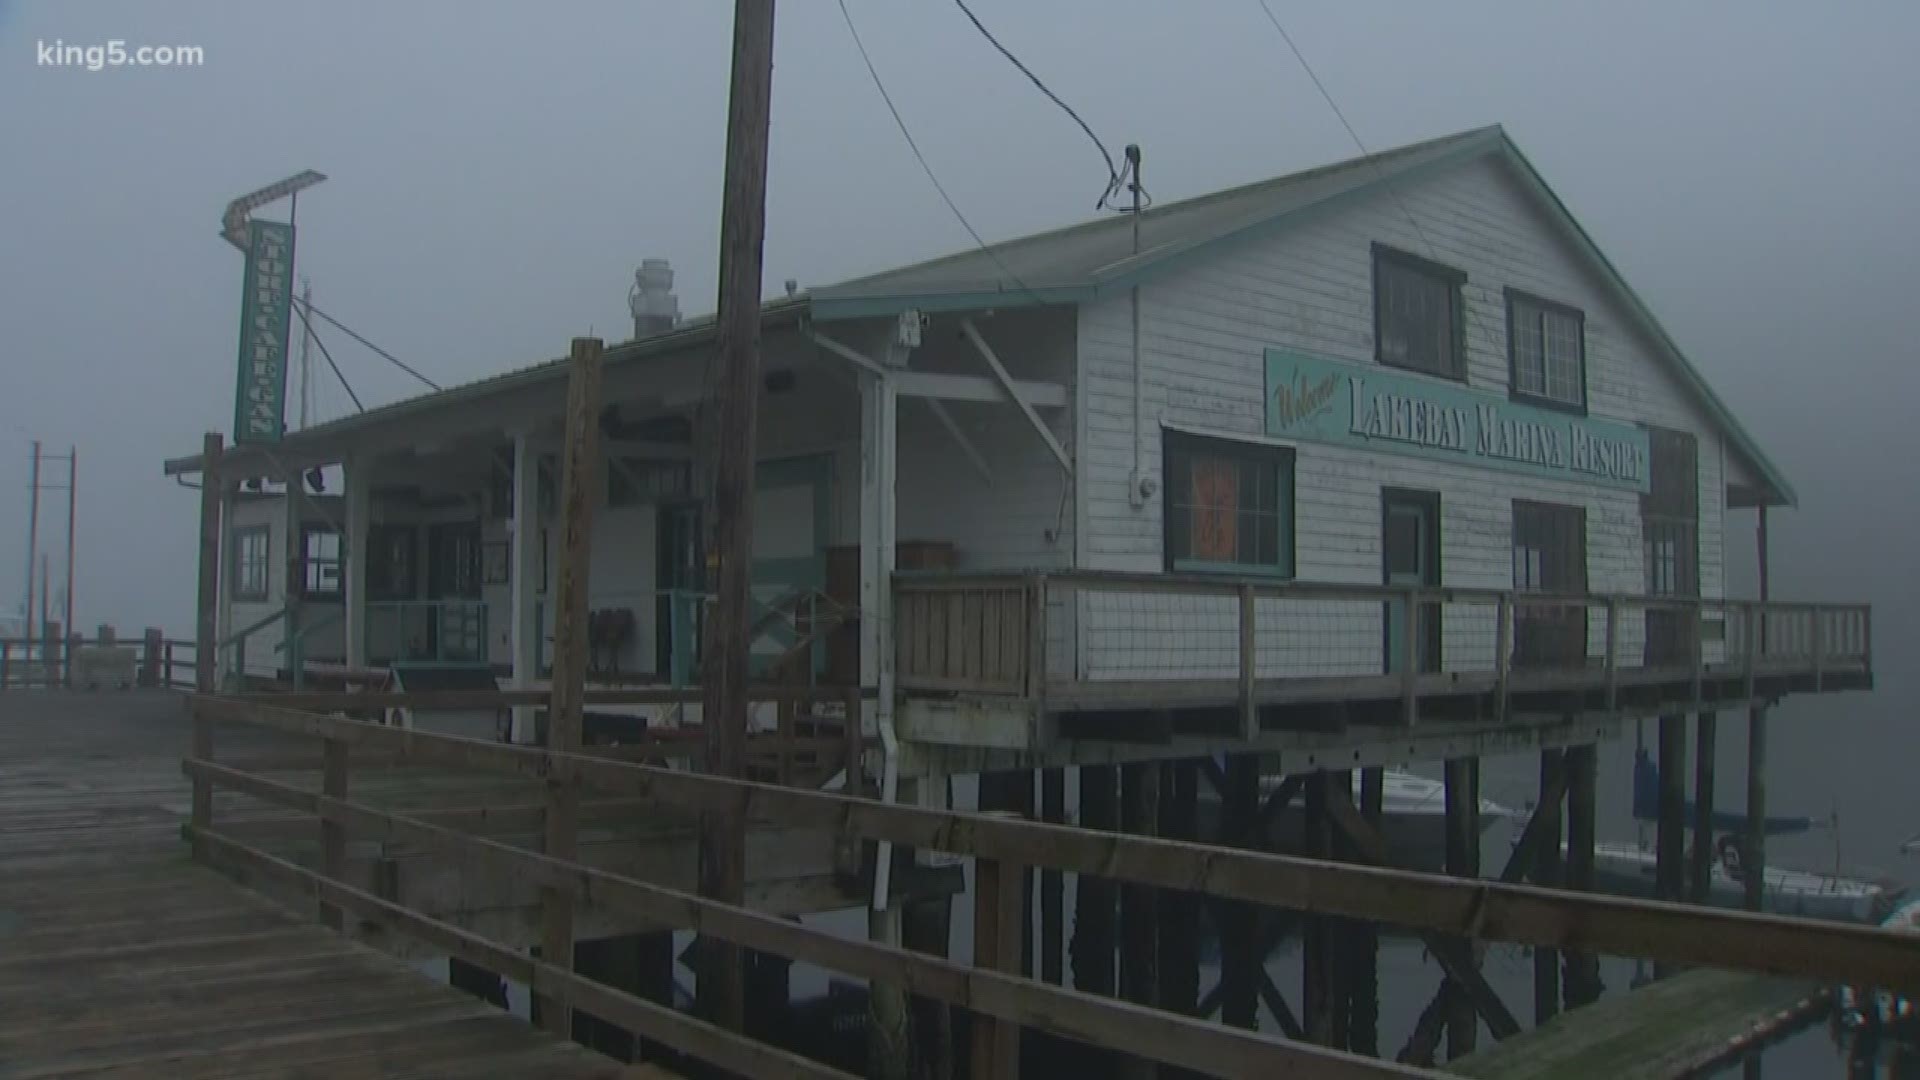 The Lakebay Marina in the South Sound may be saved by a historic designation from the Pierce County Council. KING 5's Jenna Hanchard reports -